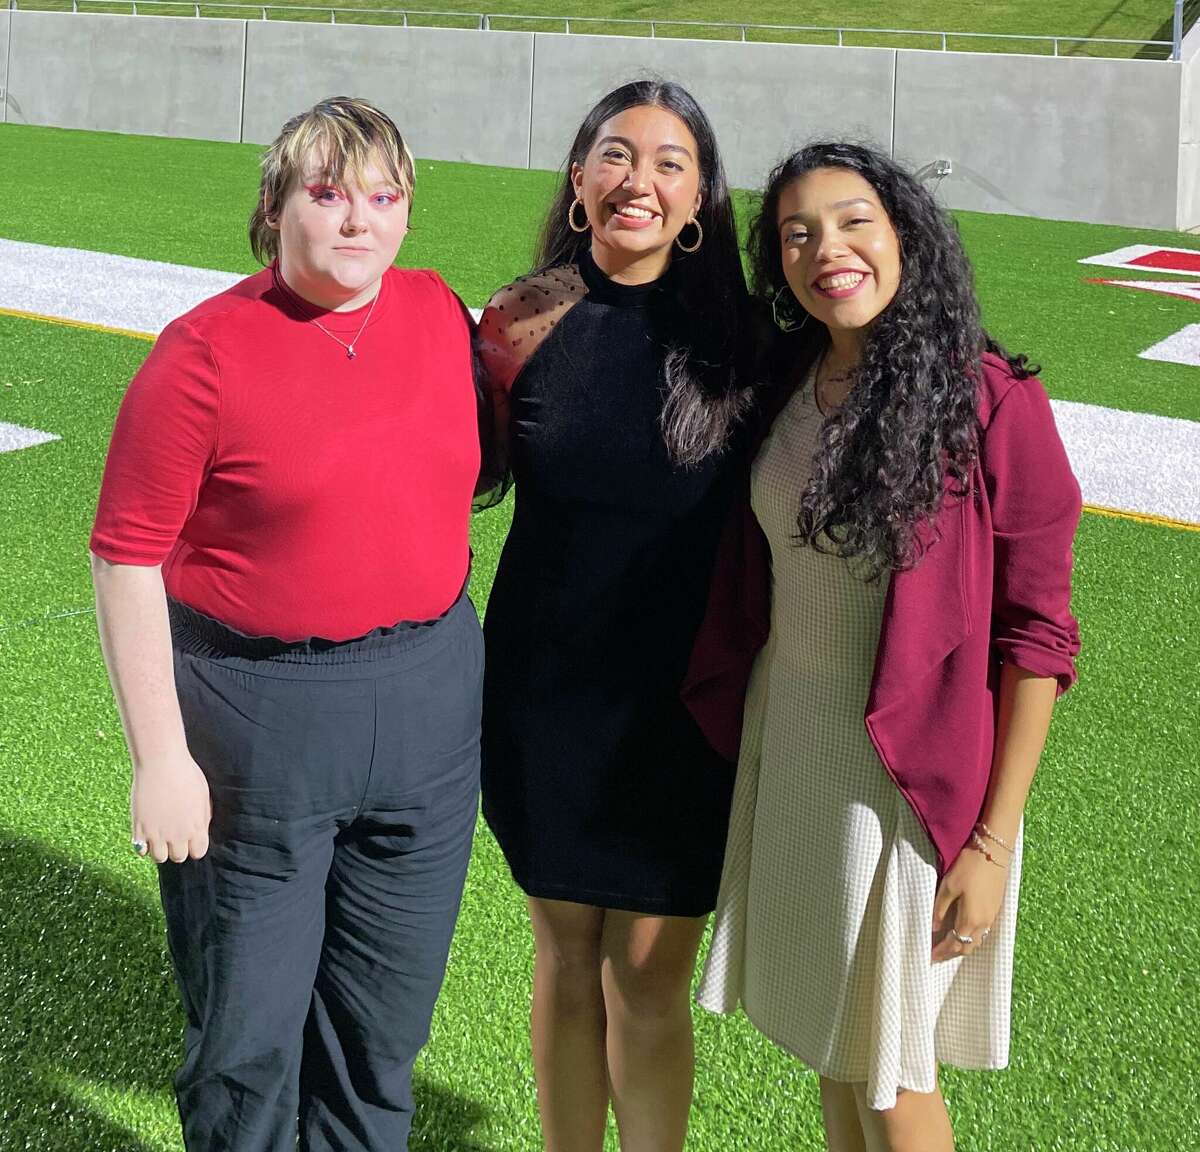 LSC-Tomball students Cyn Cooper, Allysa Leal, and Jordan Leal were selected for the Broadway Artist Alliance Summer Intensive in New York City.